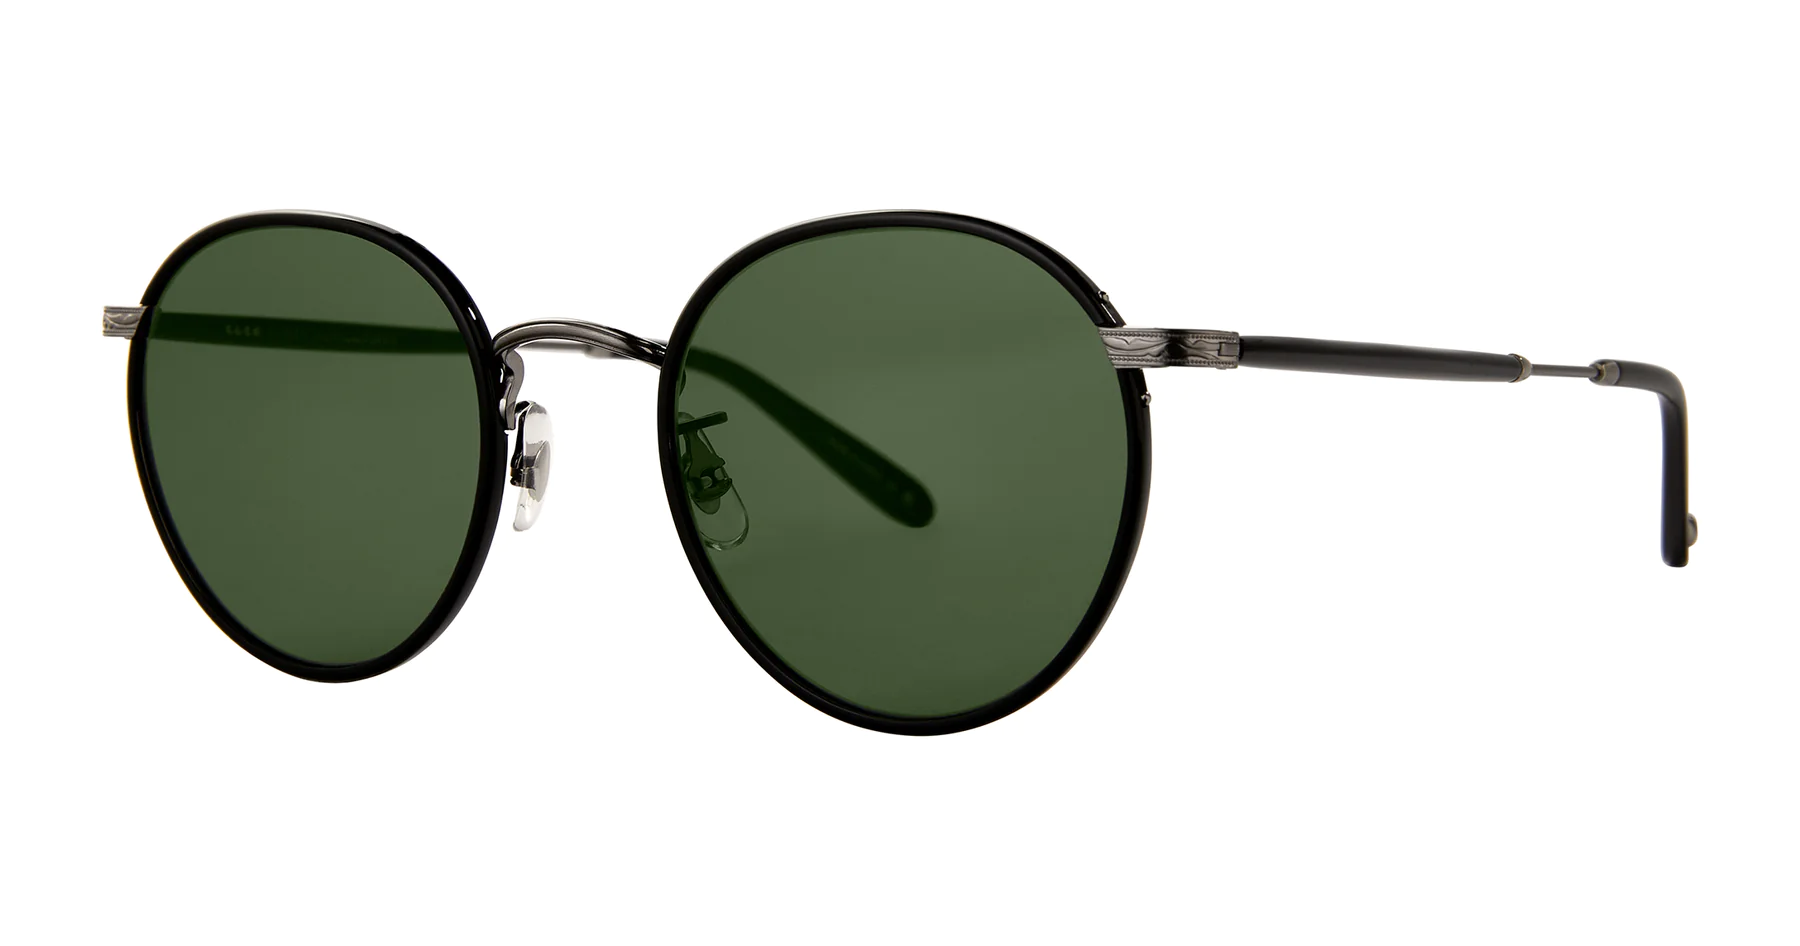 Sunglasses_Wilson_4003_BK-PW_SFPG15_2_1800x_e7c4c754-593b-4562-b0a9-430c23703af4.png